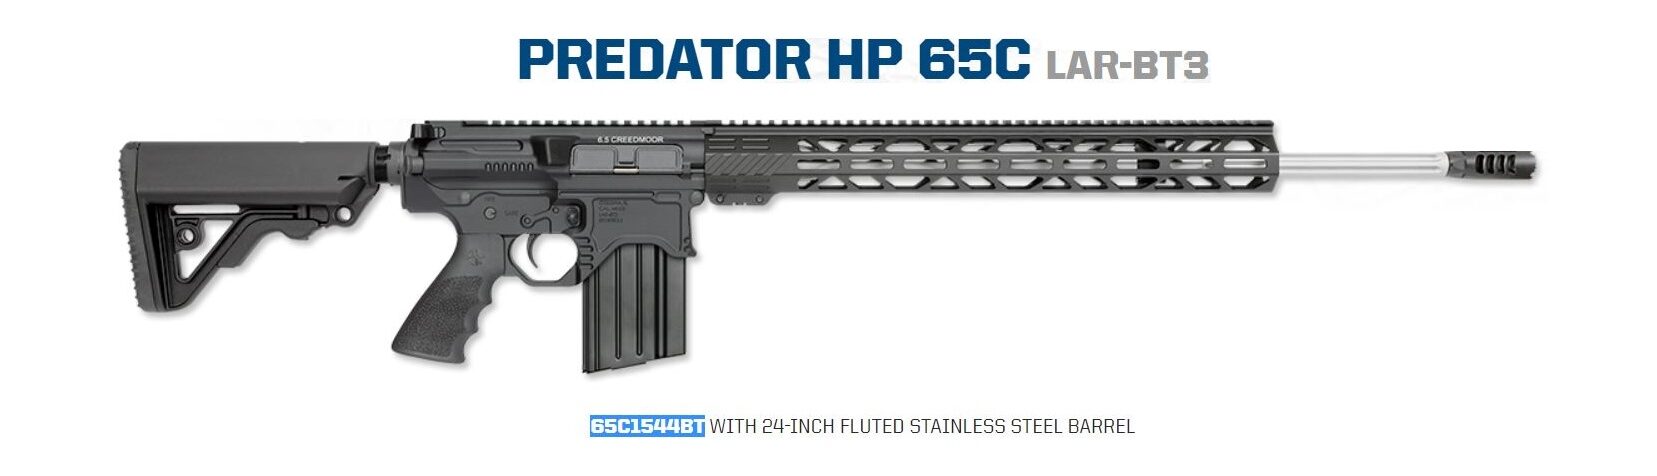 New Tactical Precision From Rock River Arms - The BT3 Predator HP Rifle